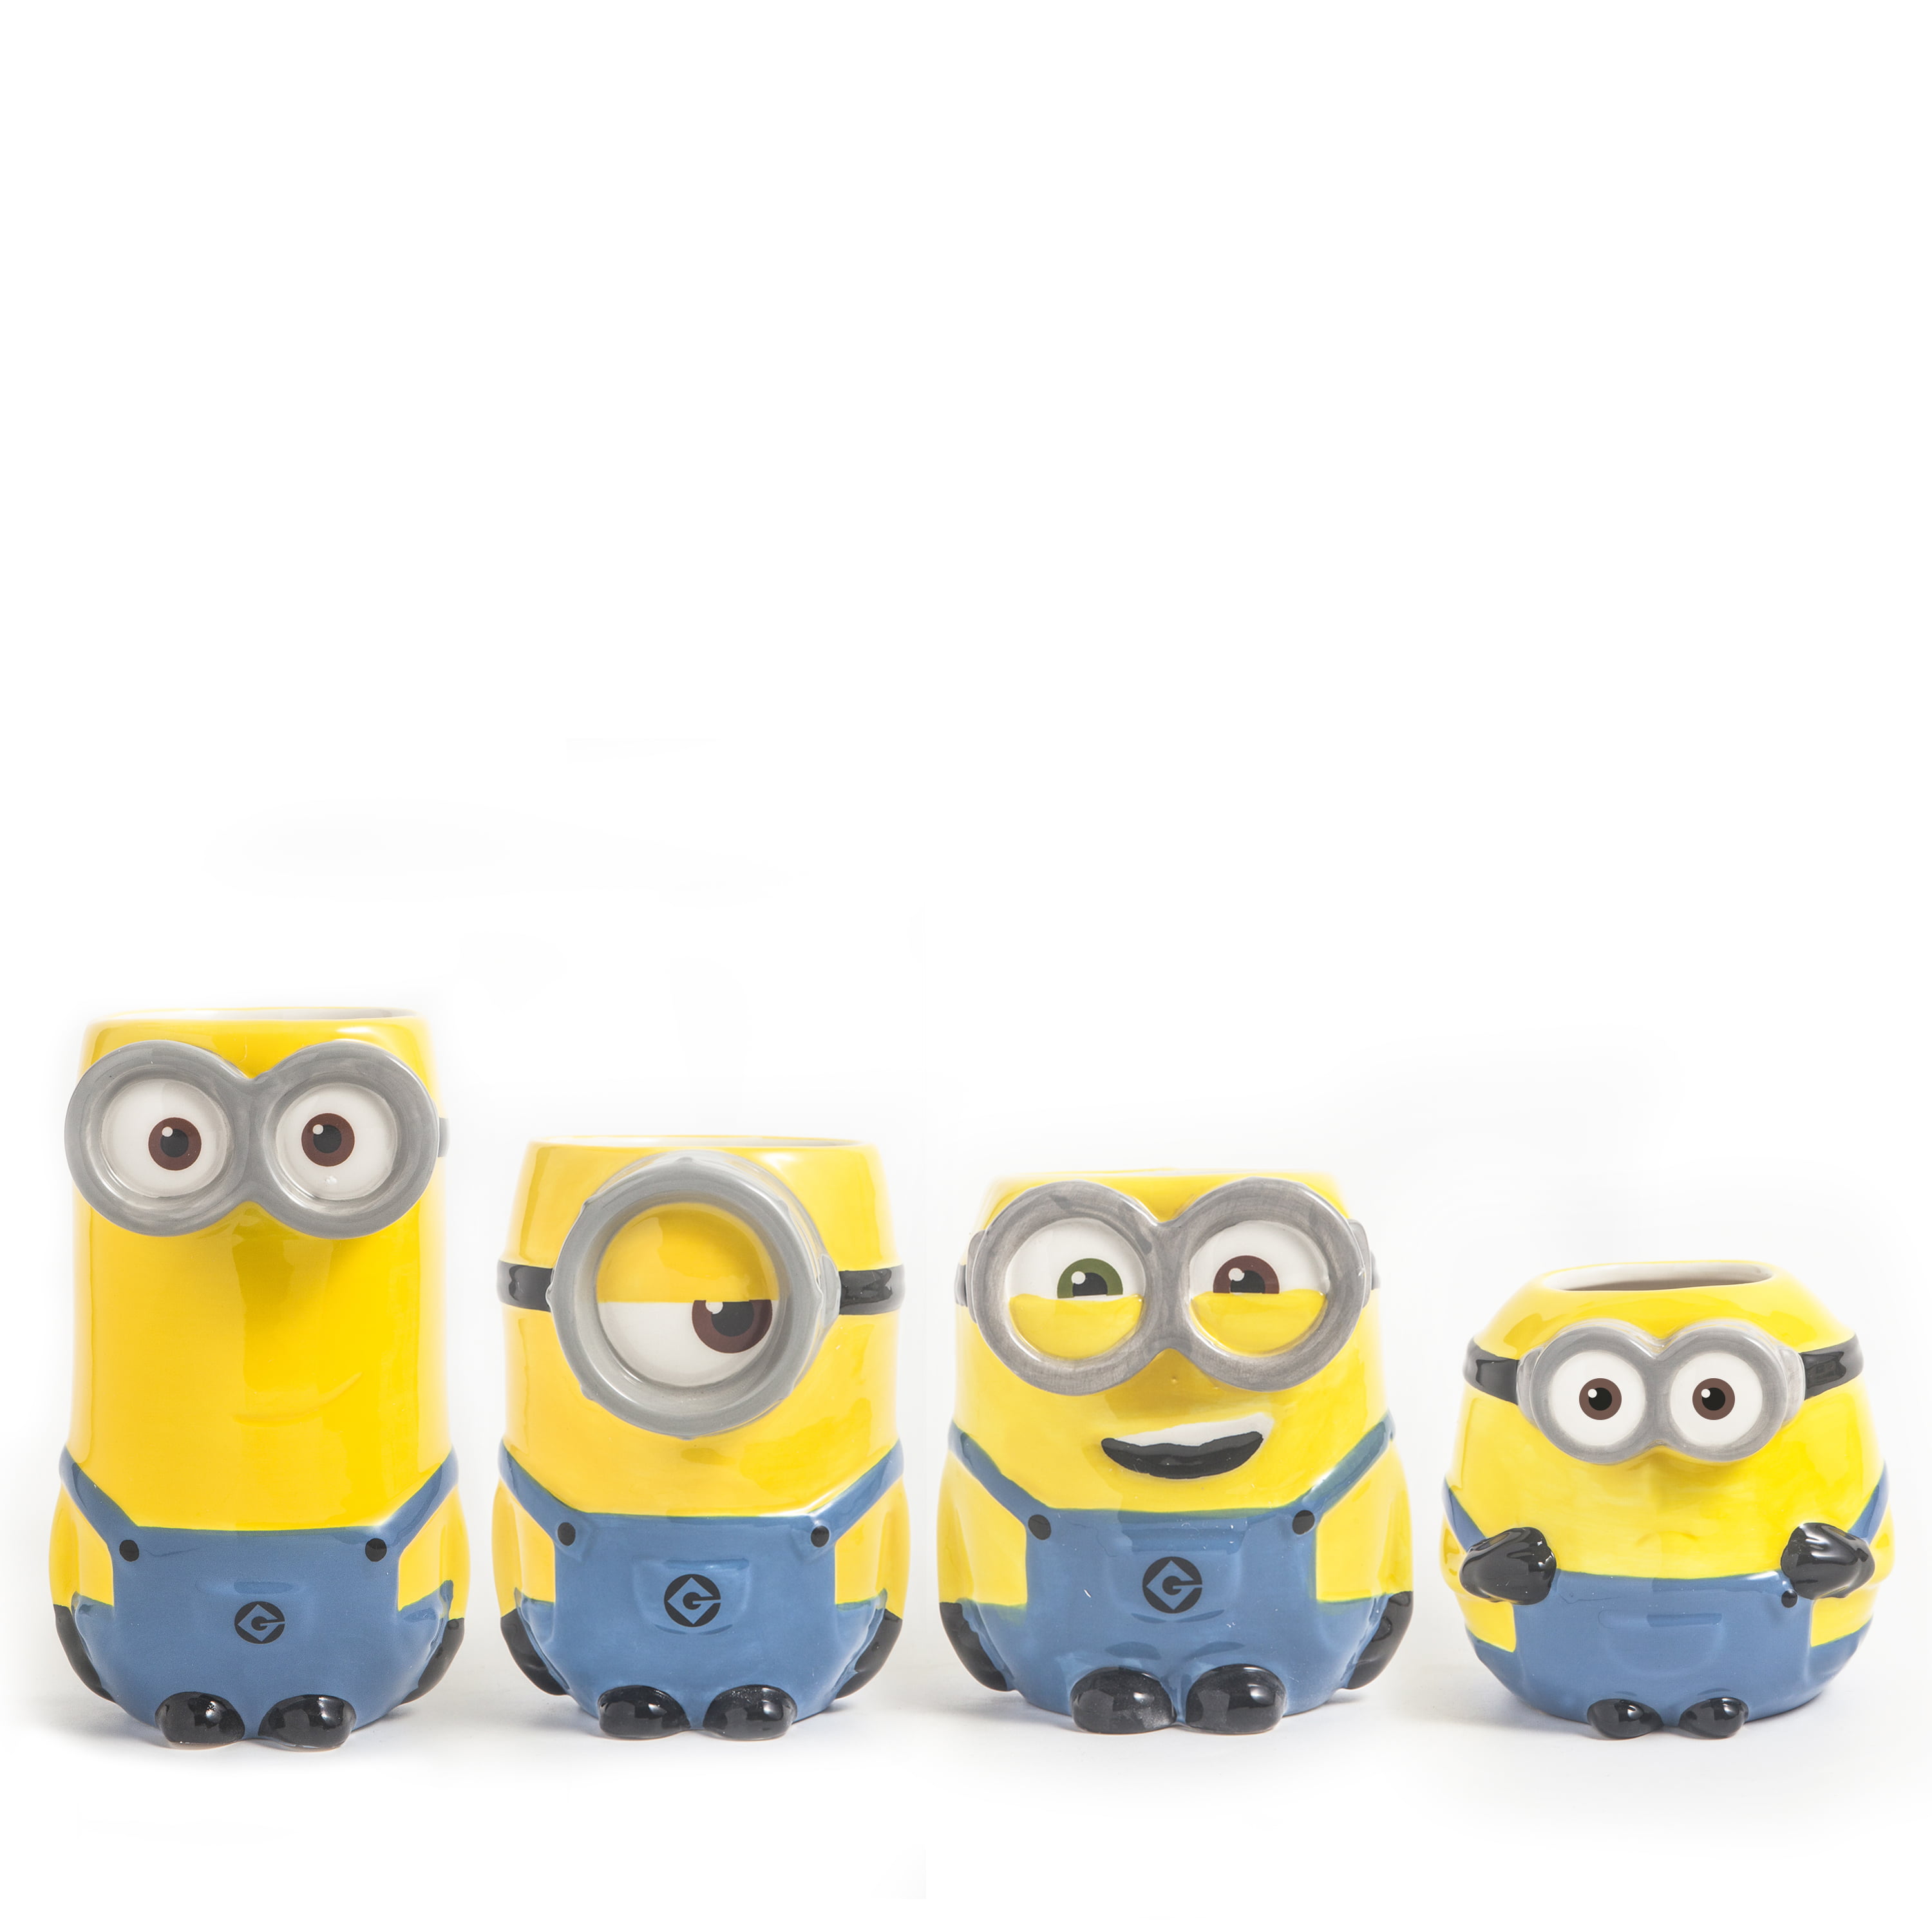 Minions Breakfast Set Kids Stacking Meal Set Bowl Plate Mug Dining despicable me 